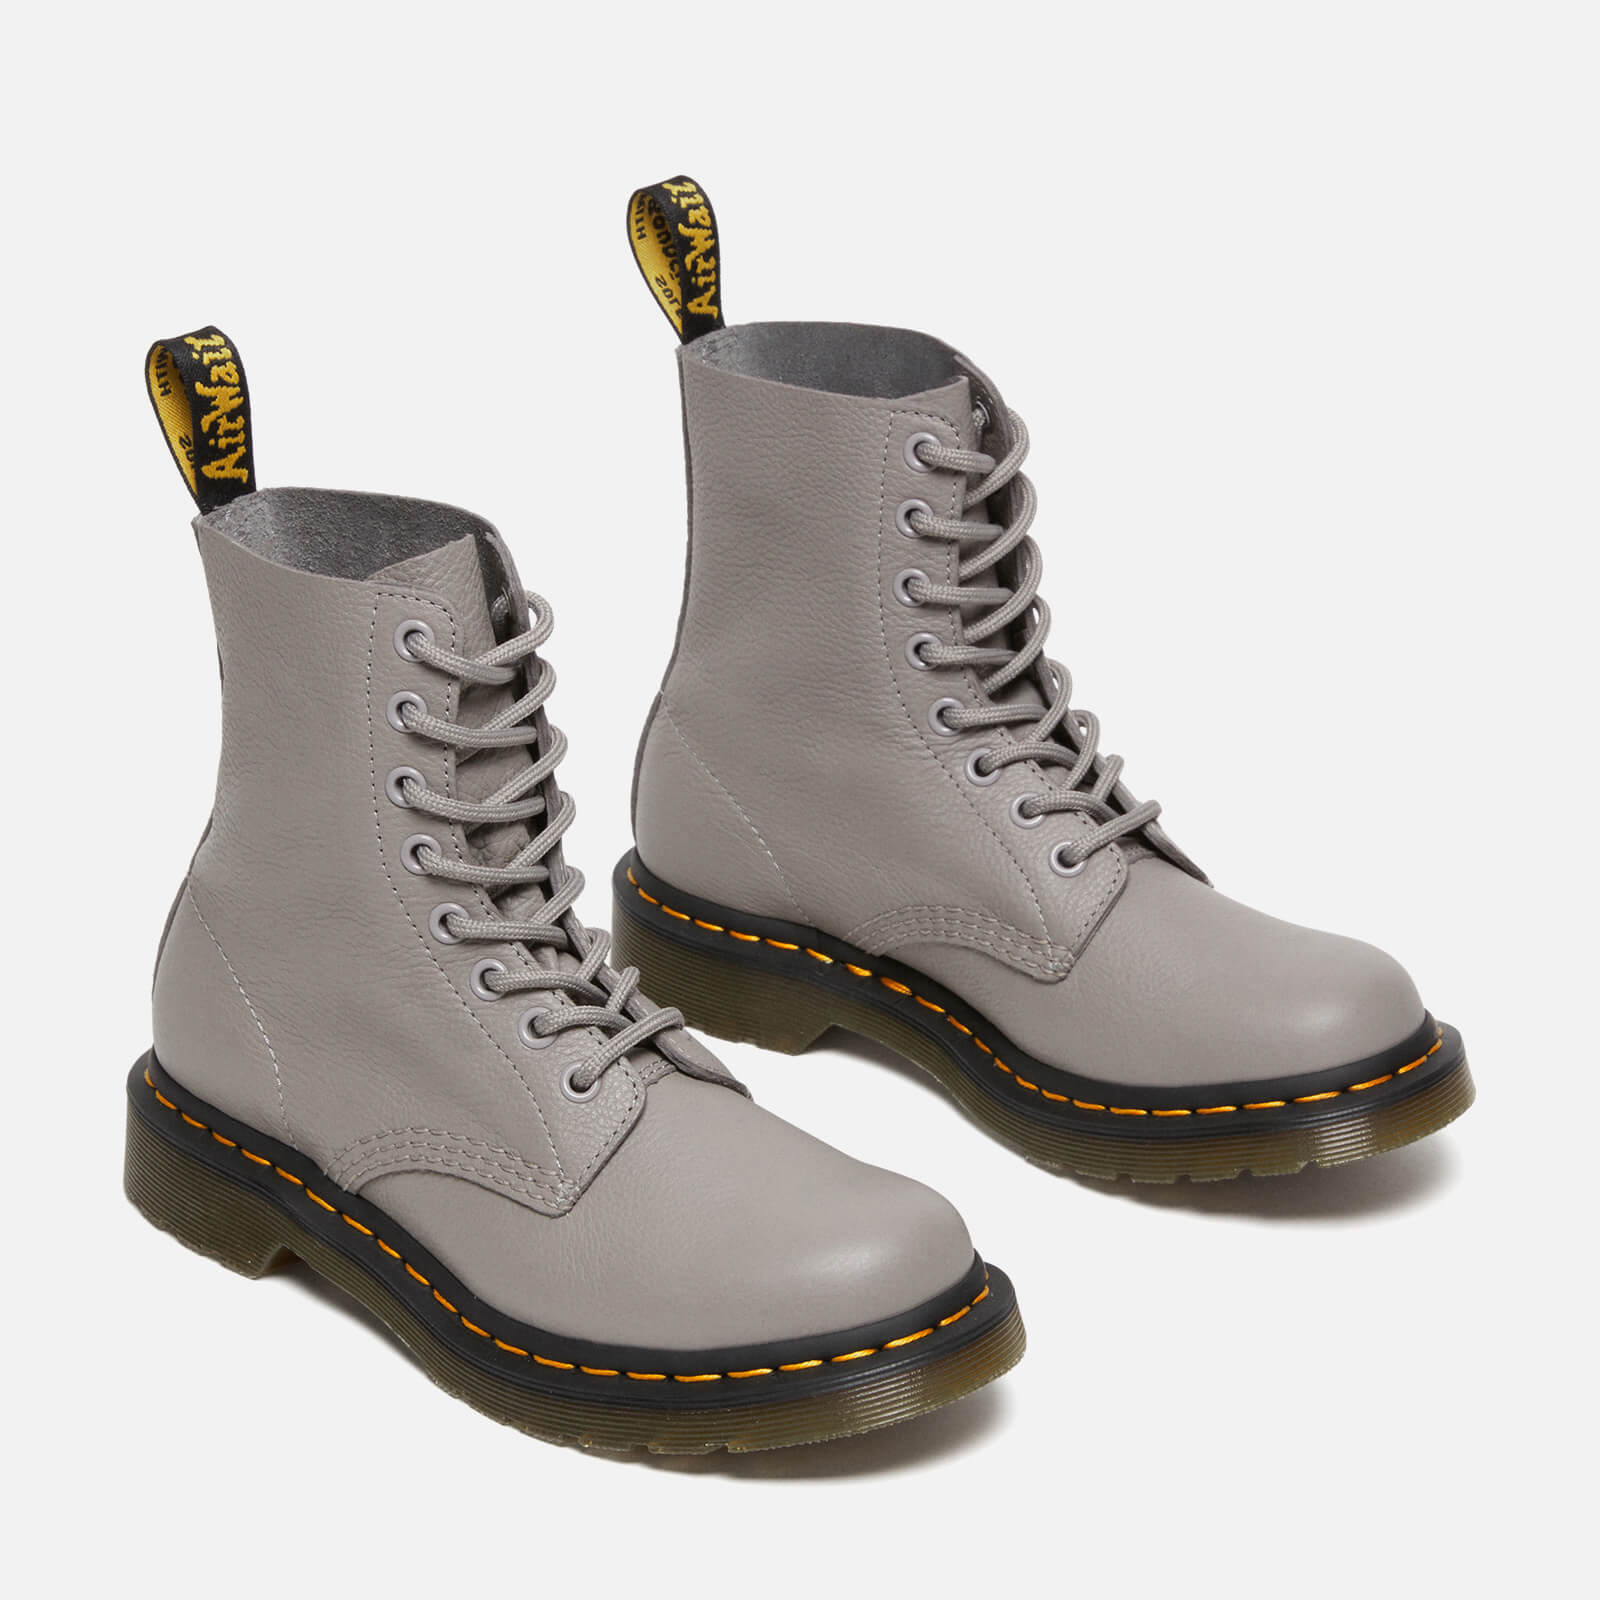 Dr. Martens 1460 Pascal Virginia Leather Boots - UK 3